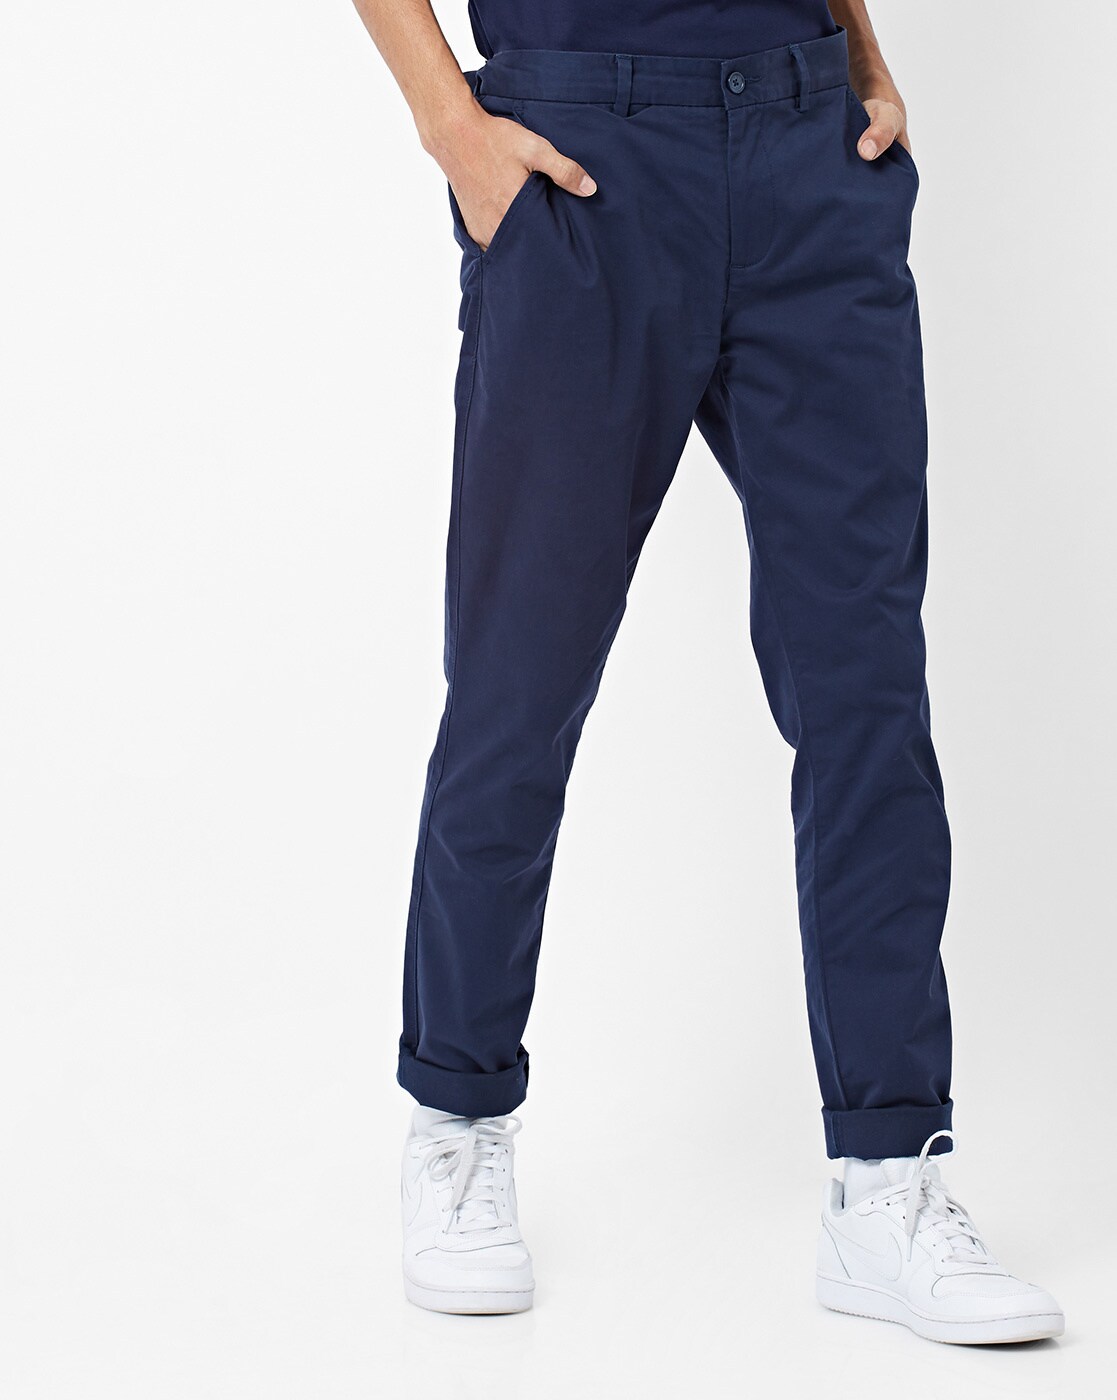 Casual Trousers in Navy color - urban clothing co.